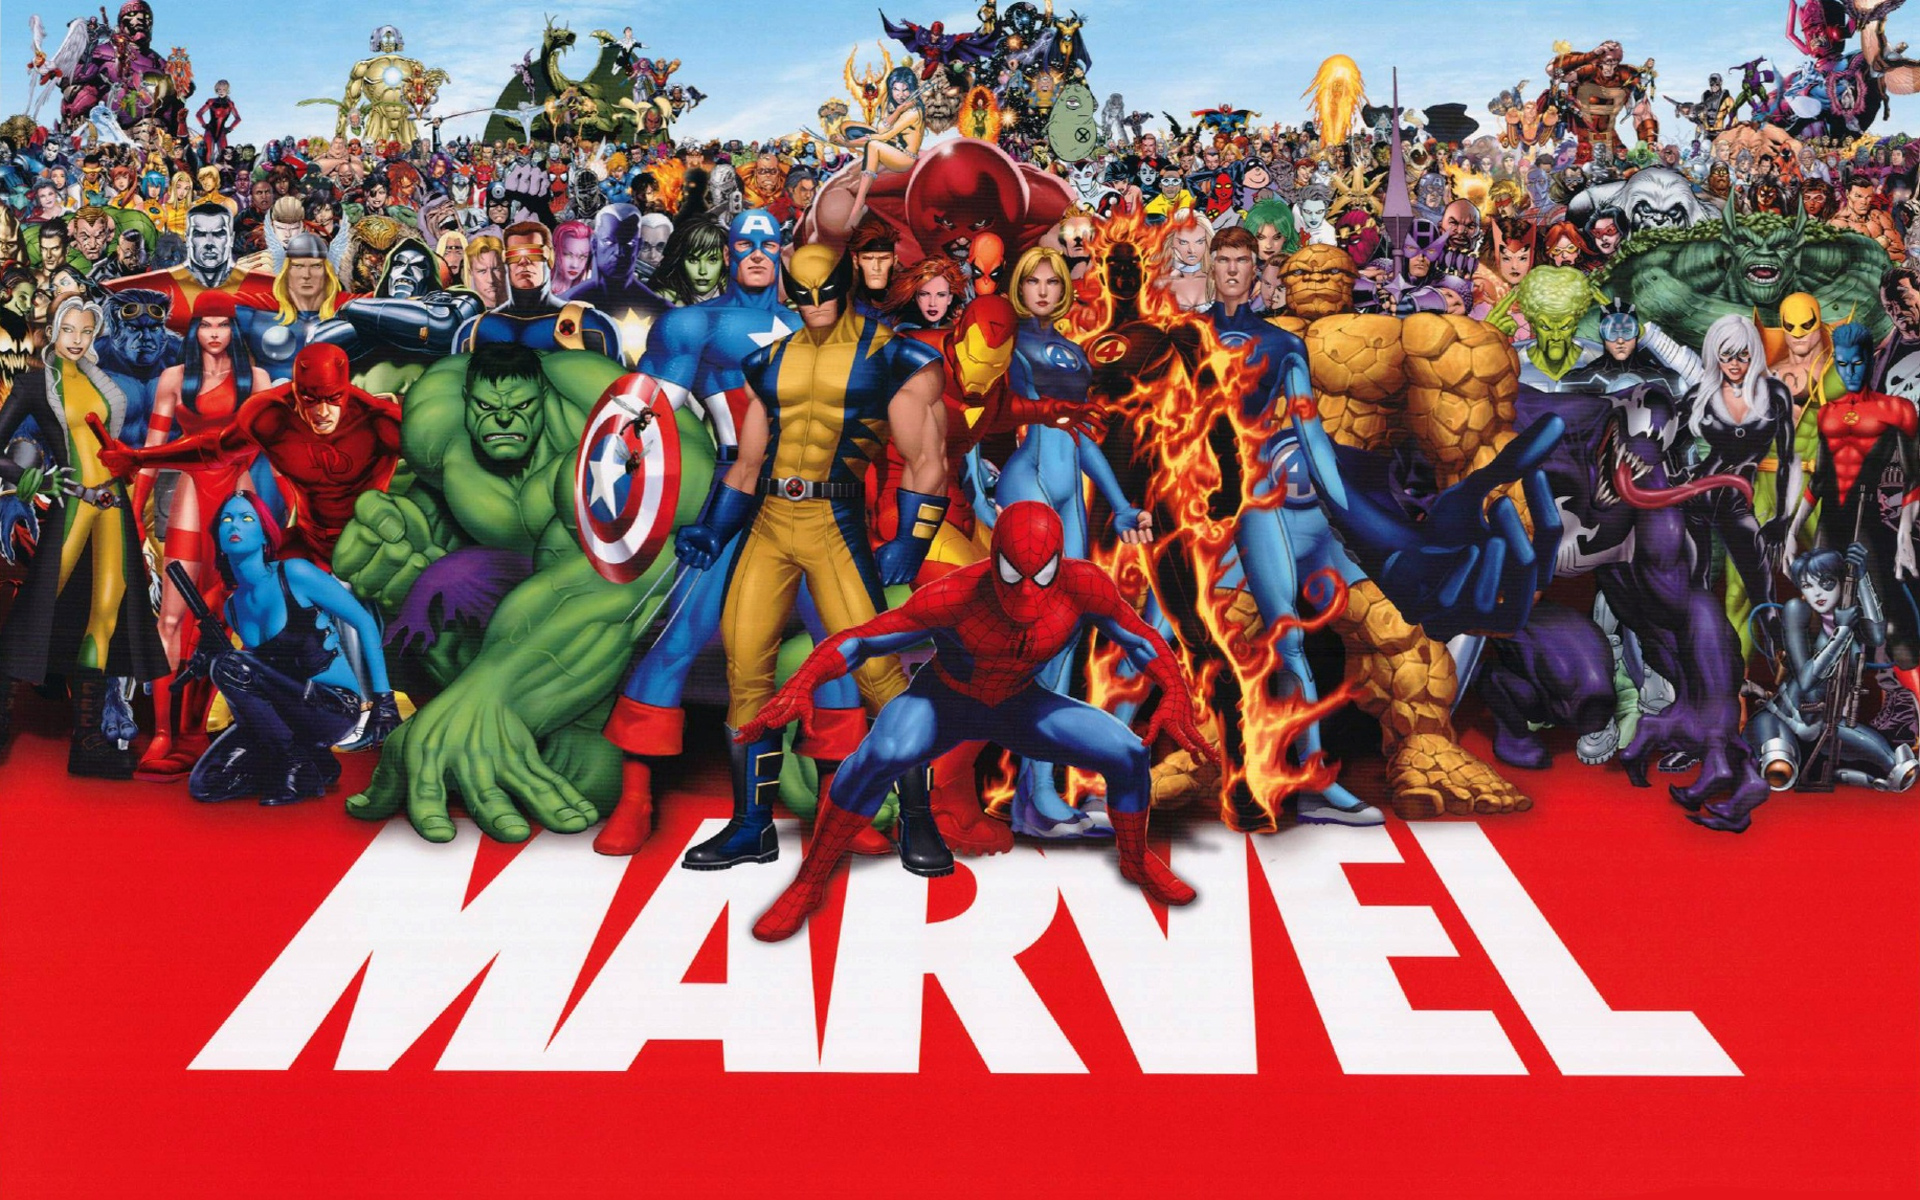 MARVEL wallpaper with Heroes